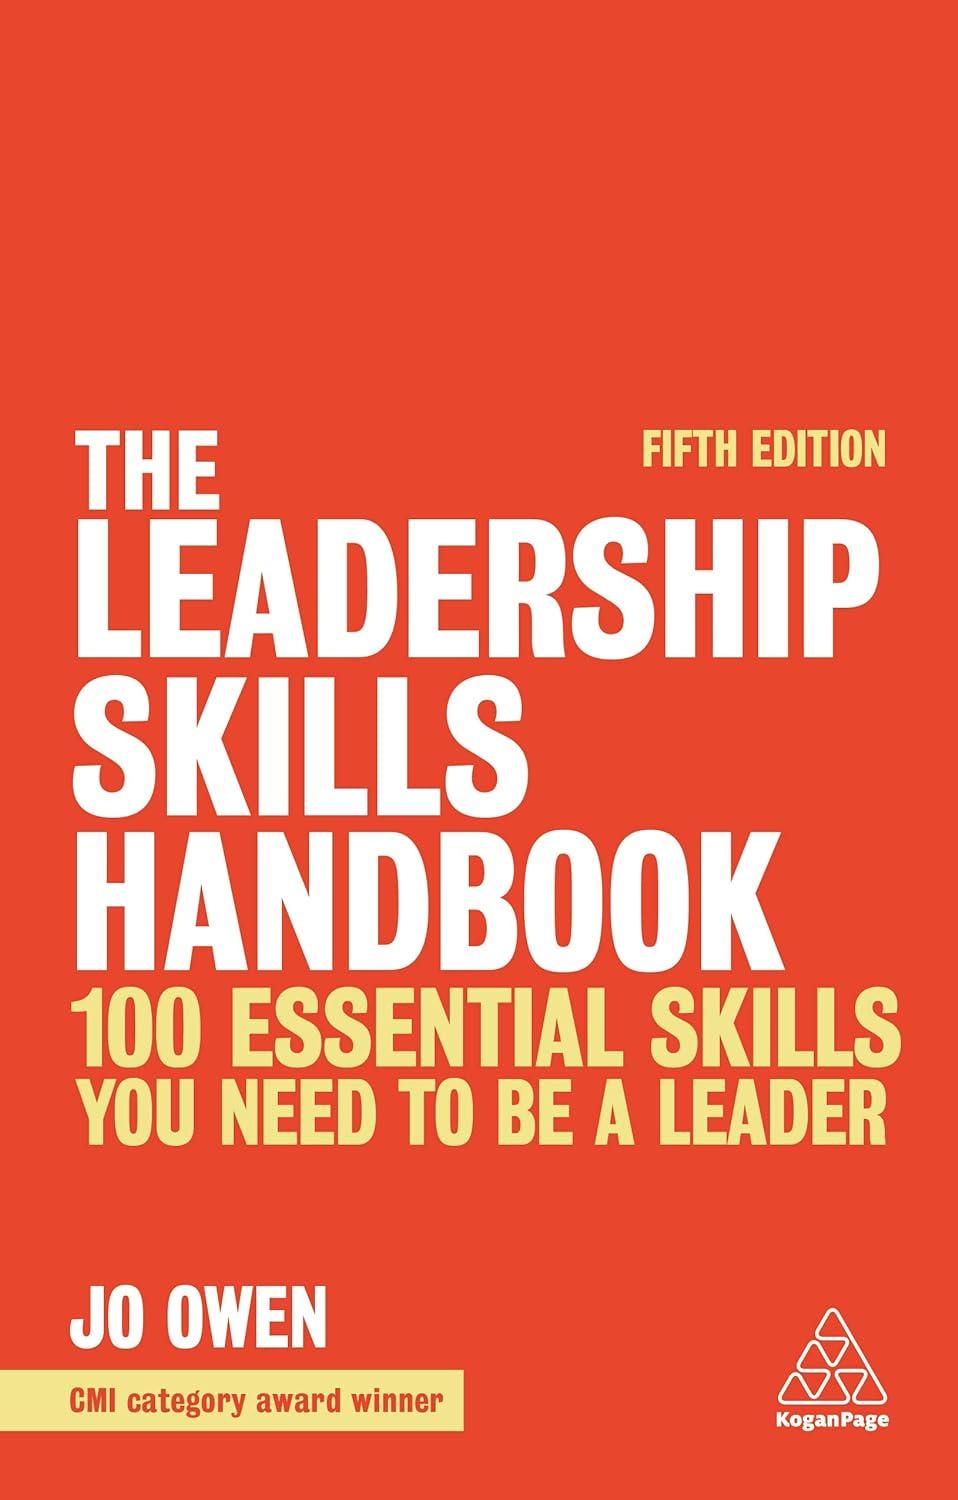 the leadership skills handbook 100 essential skills you need to be a leader 5th edition jo owen 1789666686,